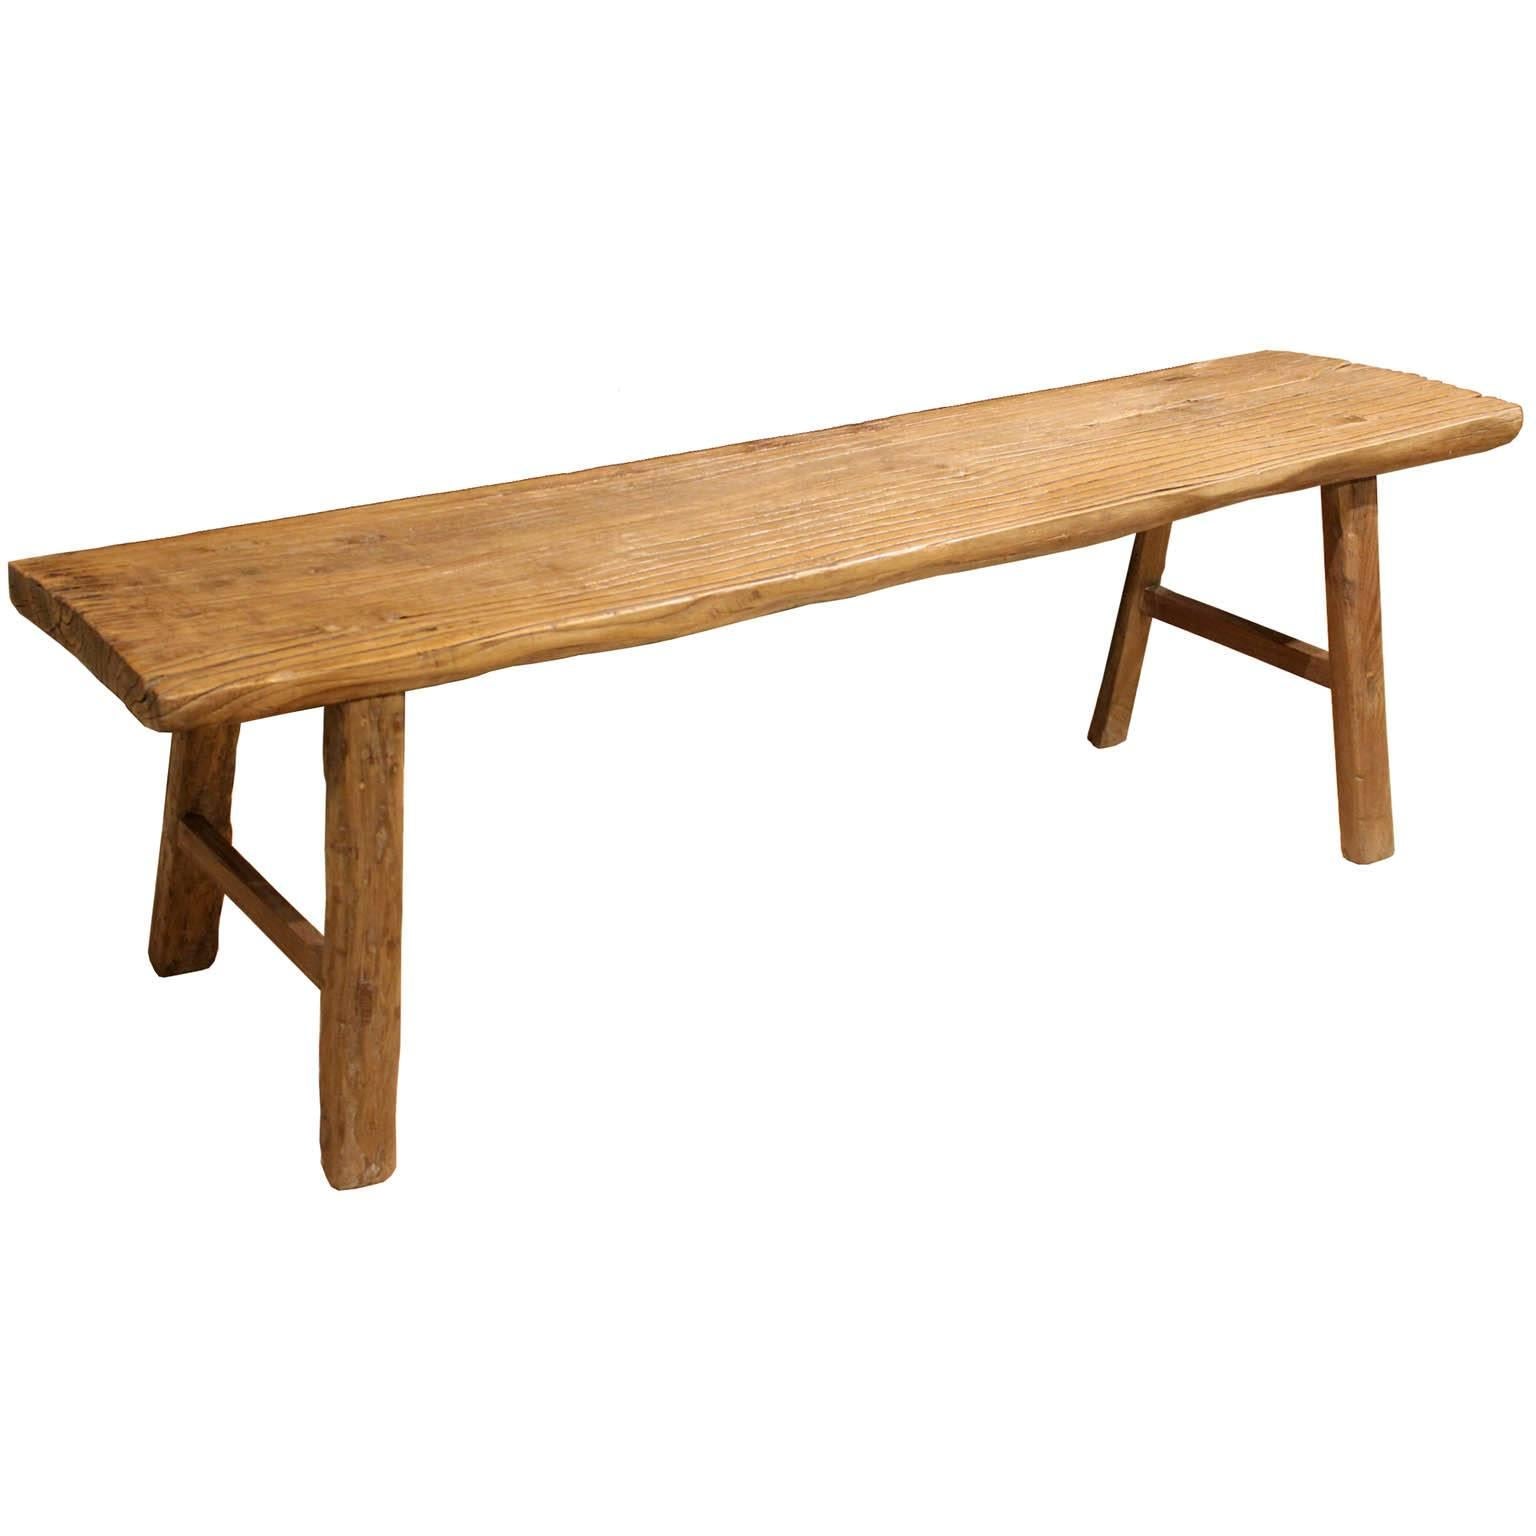 Elmwood bench with side support bars was originally used to practice martial arts. Place at the end of a bed or in the living room for extra seating.